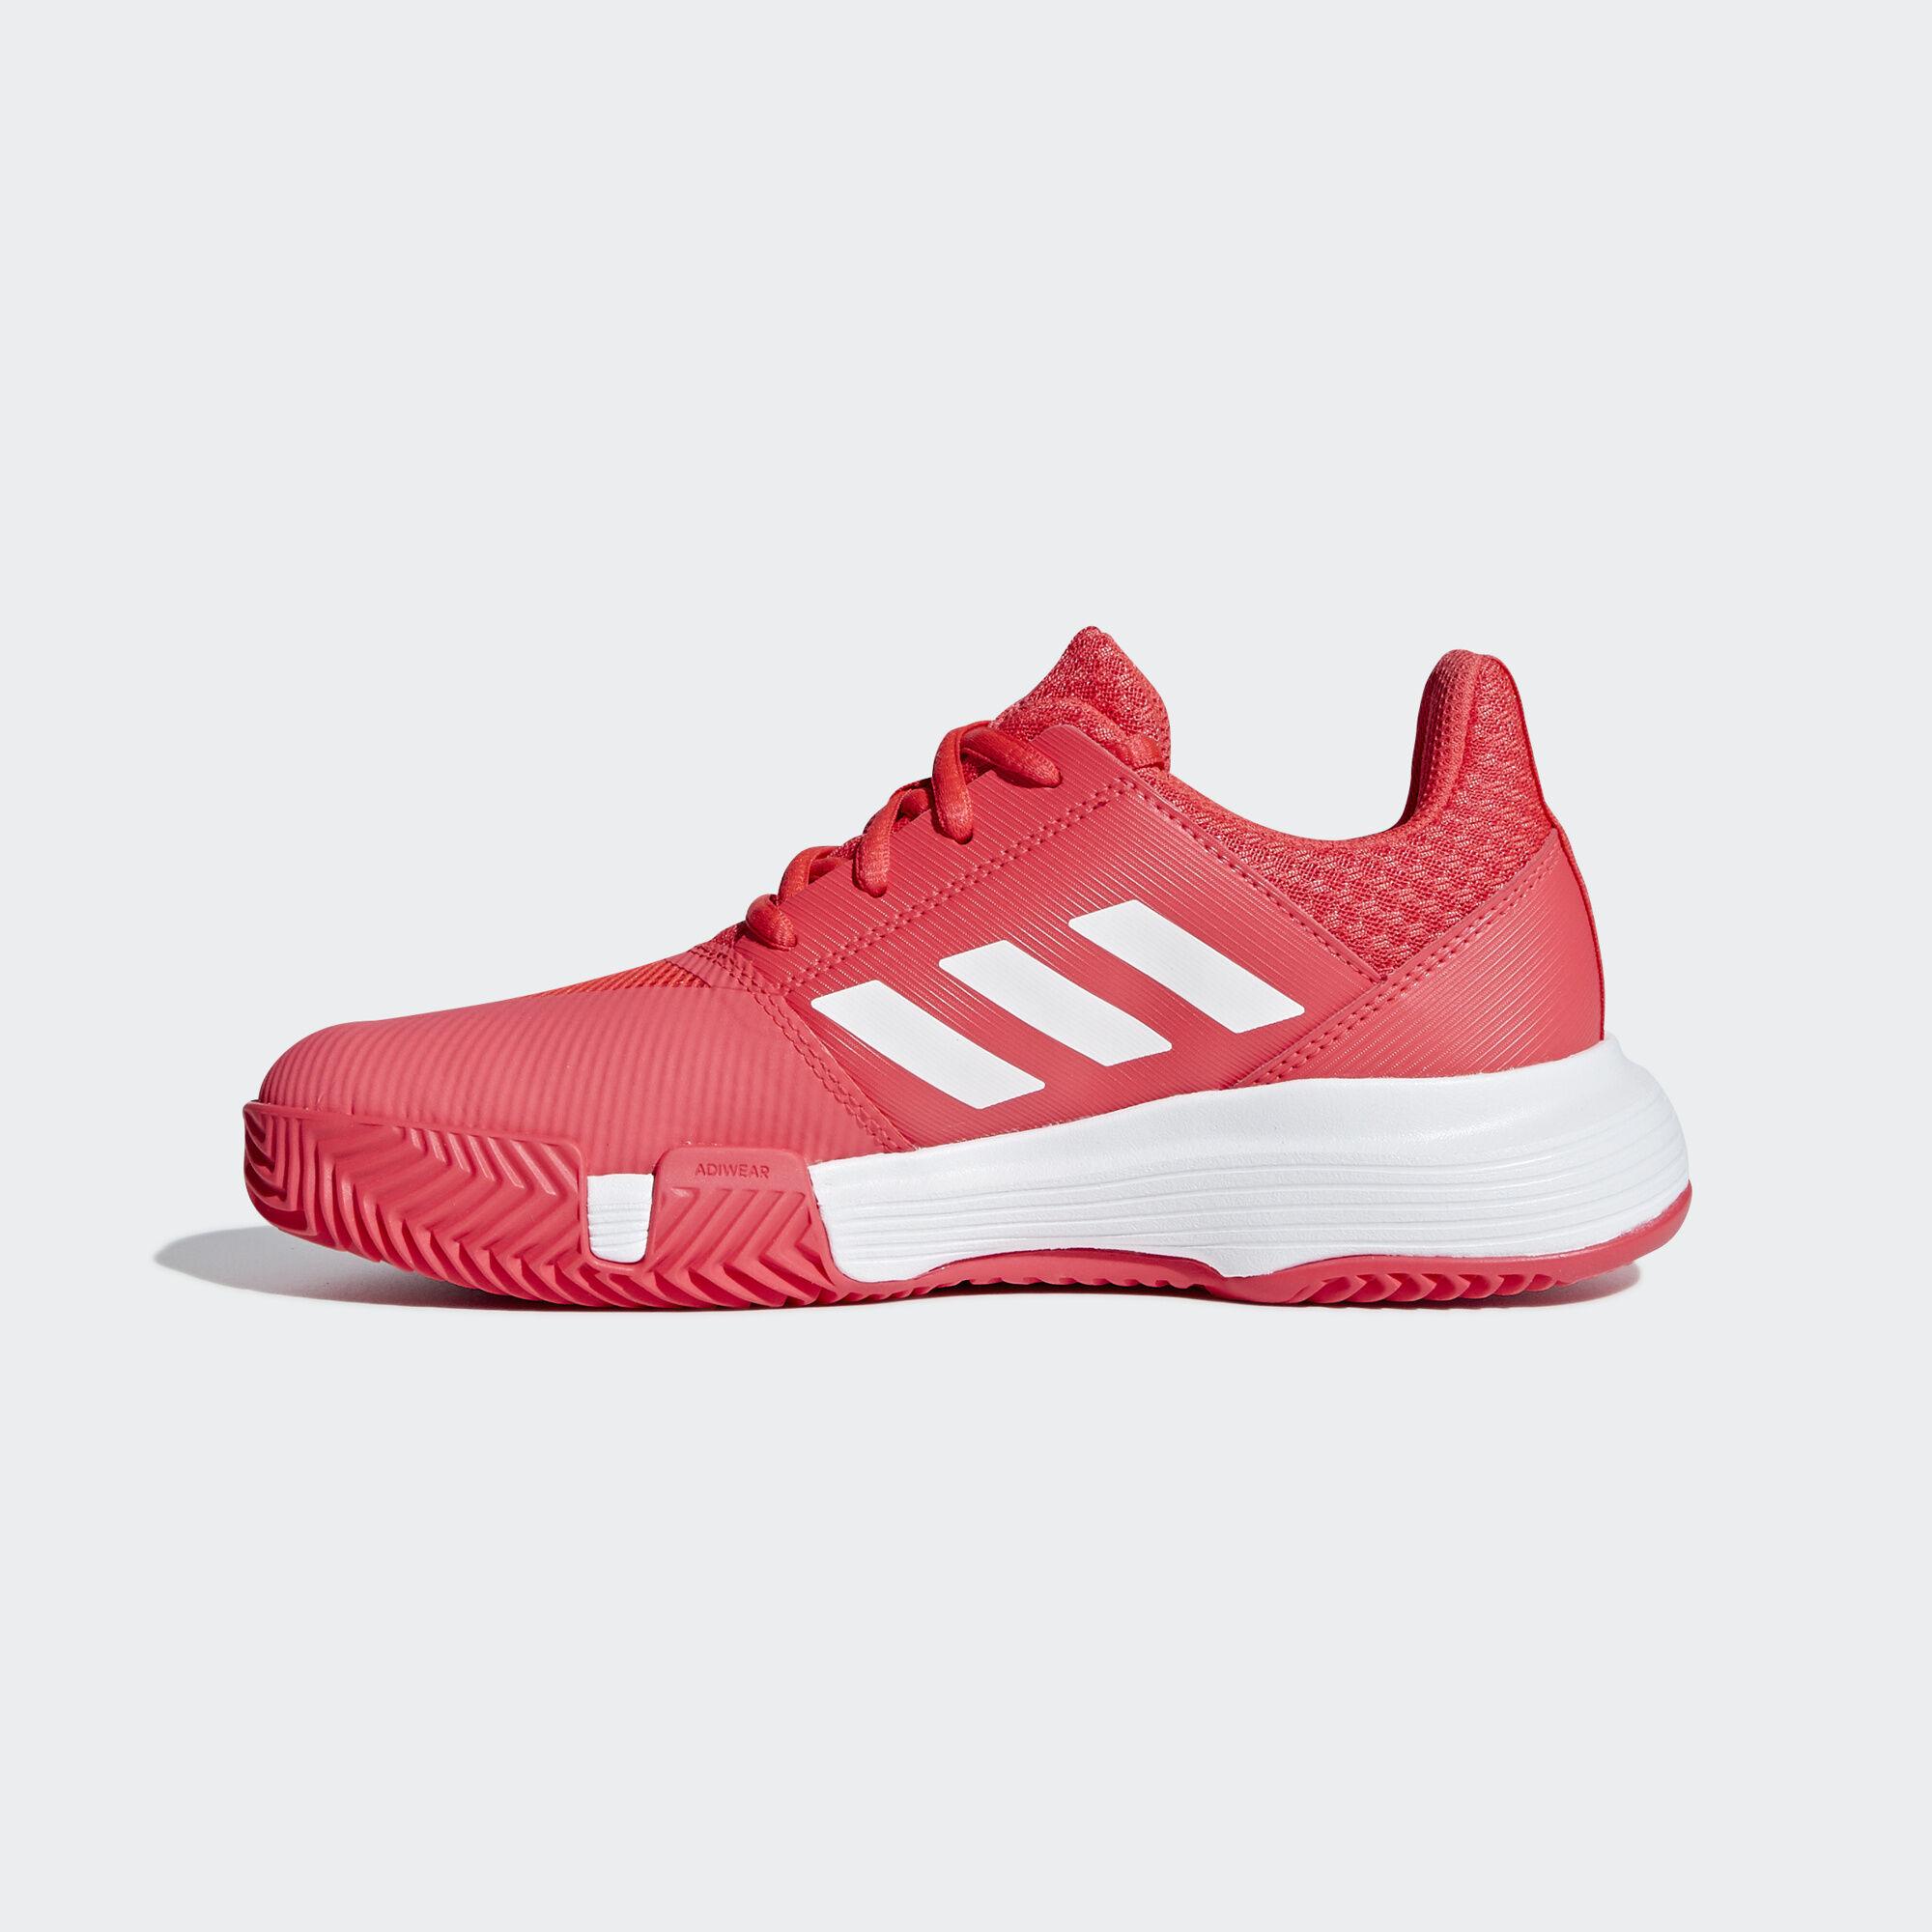 Adidas Kids CourtJam Tennis Shoes - Shock Red/Cloud White/Matte Silver ...